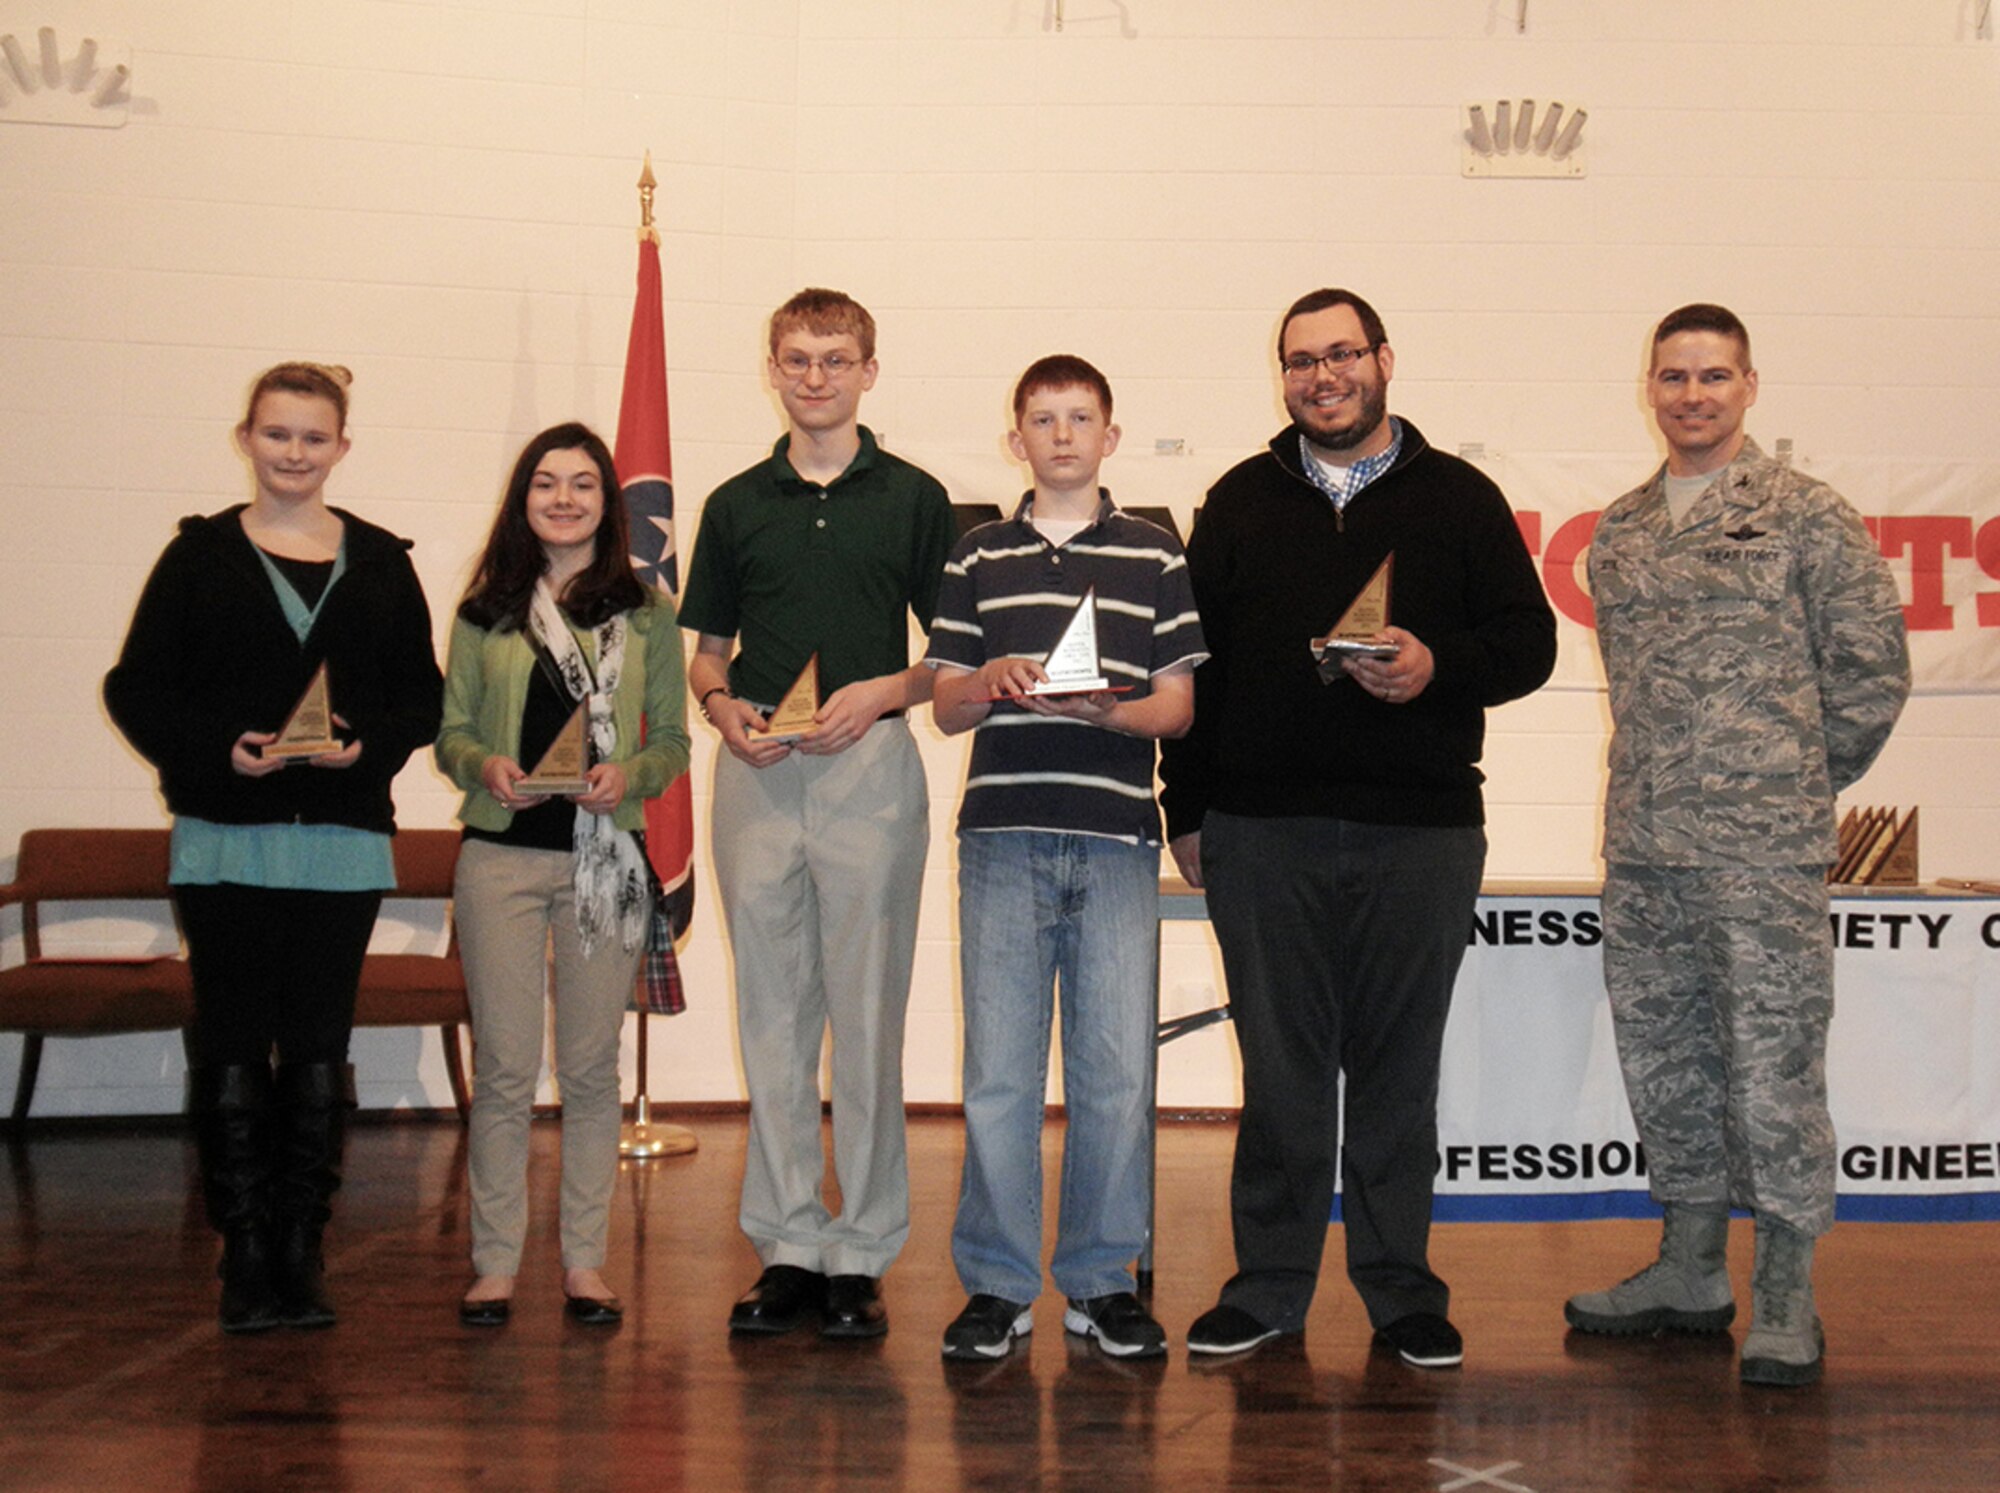 From left to right, West Middle School 8th graders Kelsi Burt, Morgan Anderson and James Johnson, West Middle School 7th grader Sam Daugherty, and West Middle School coach Chris King, pose with AEDC Commander Col. Raymond Toth after Tullahoma West Middle School’s team earned third place in the local 2013 MathCounts competition held Feb. 16 at the University of Tennessee Space Institute. (Photo provided)